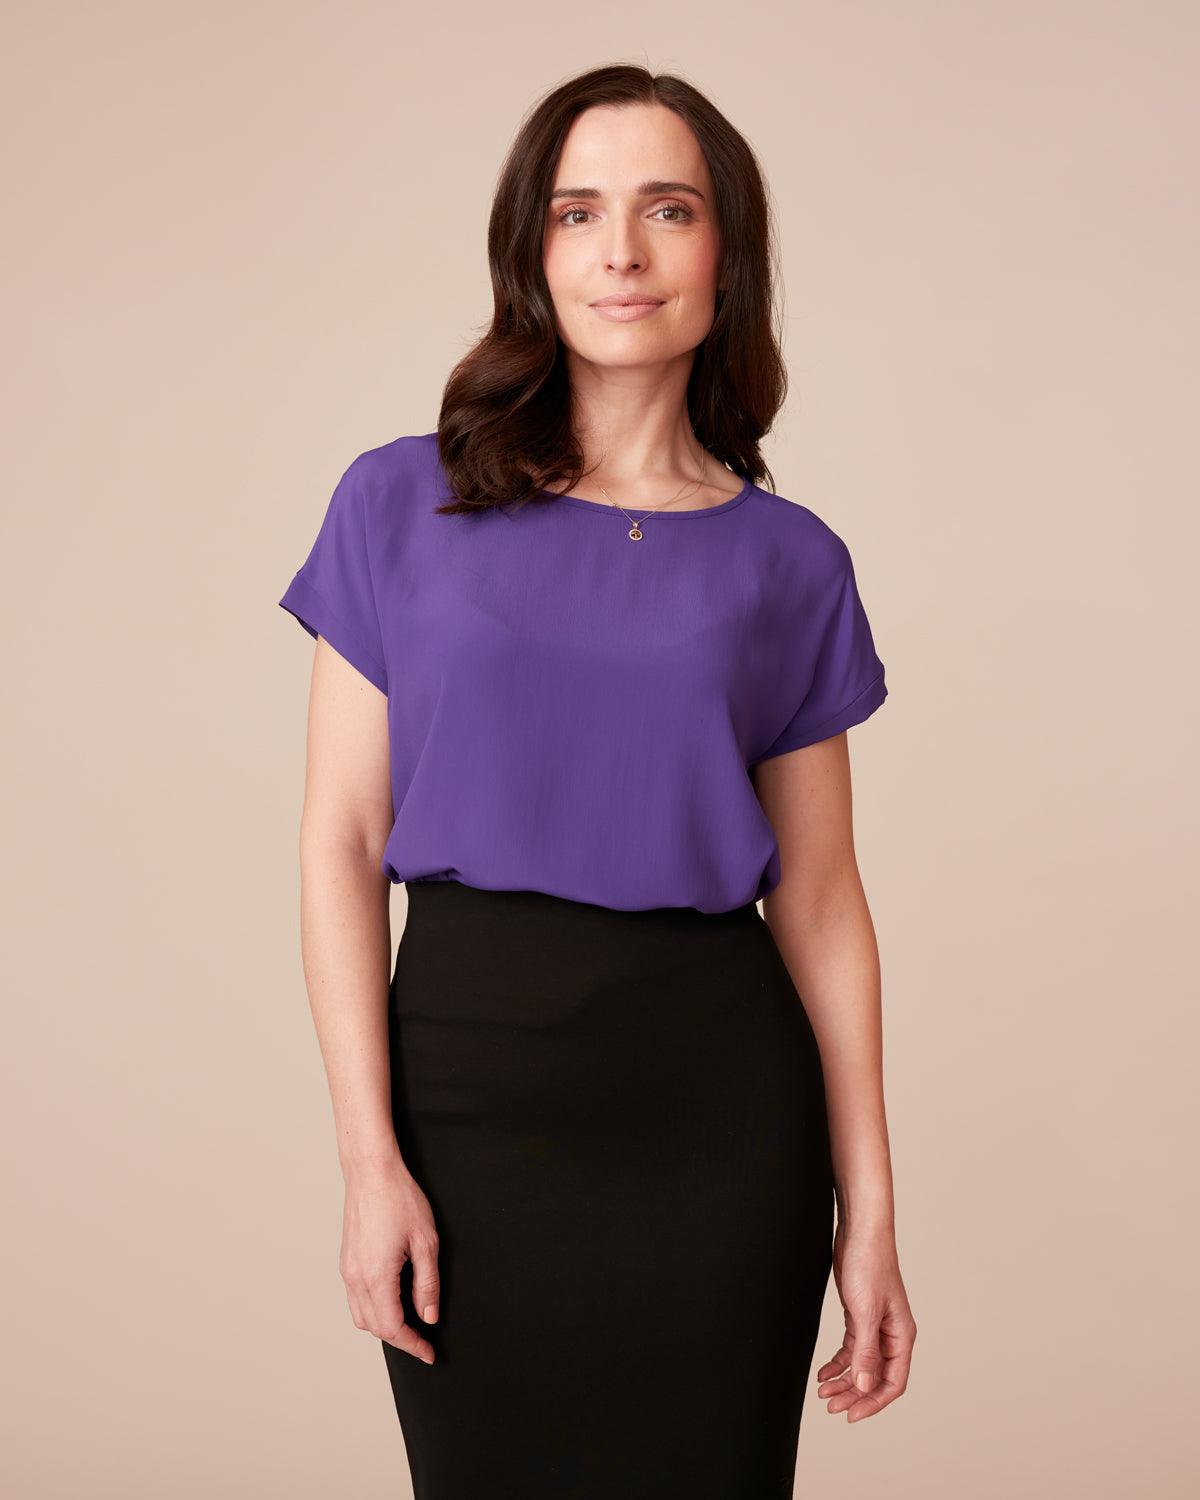 "#color_AMETHYST|Daphne is 5'9", wearing a size S